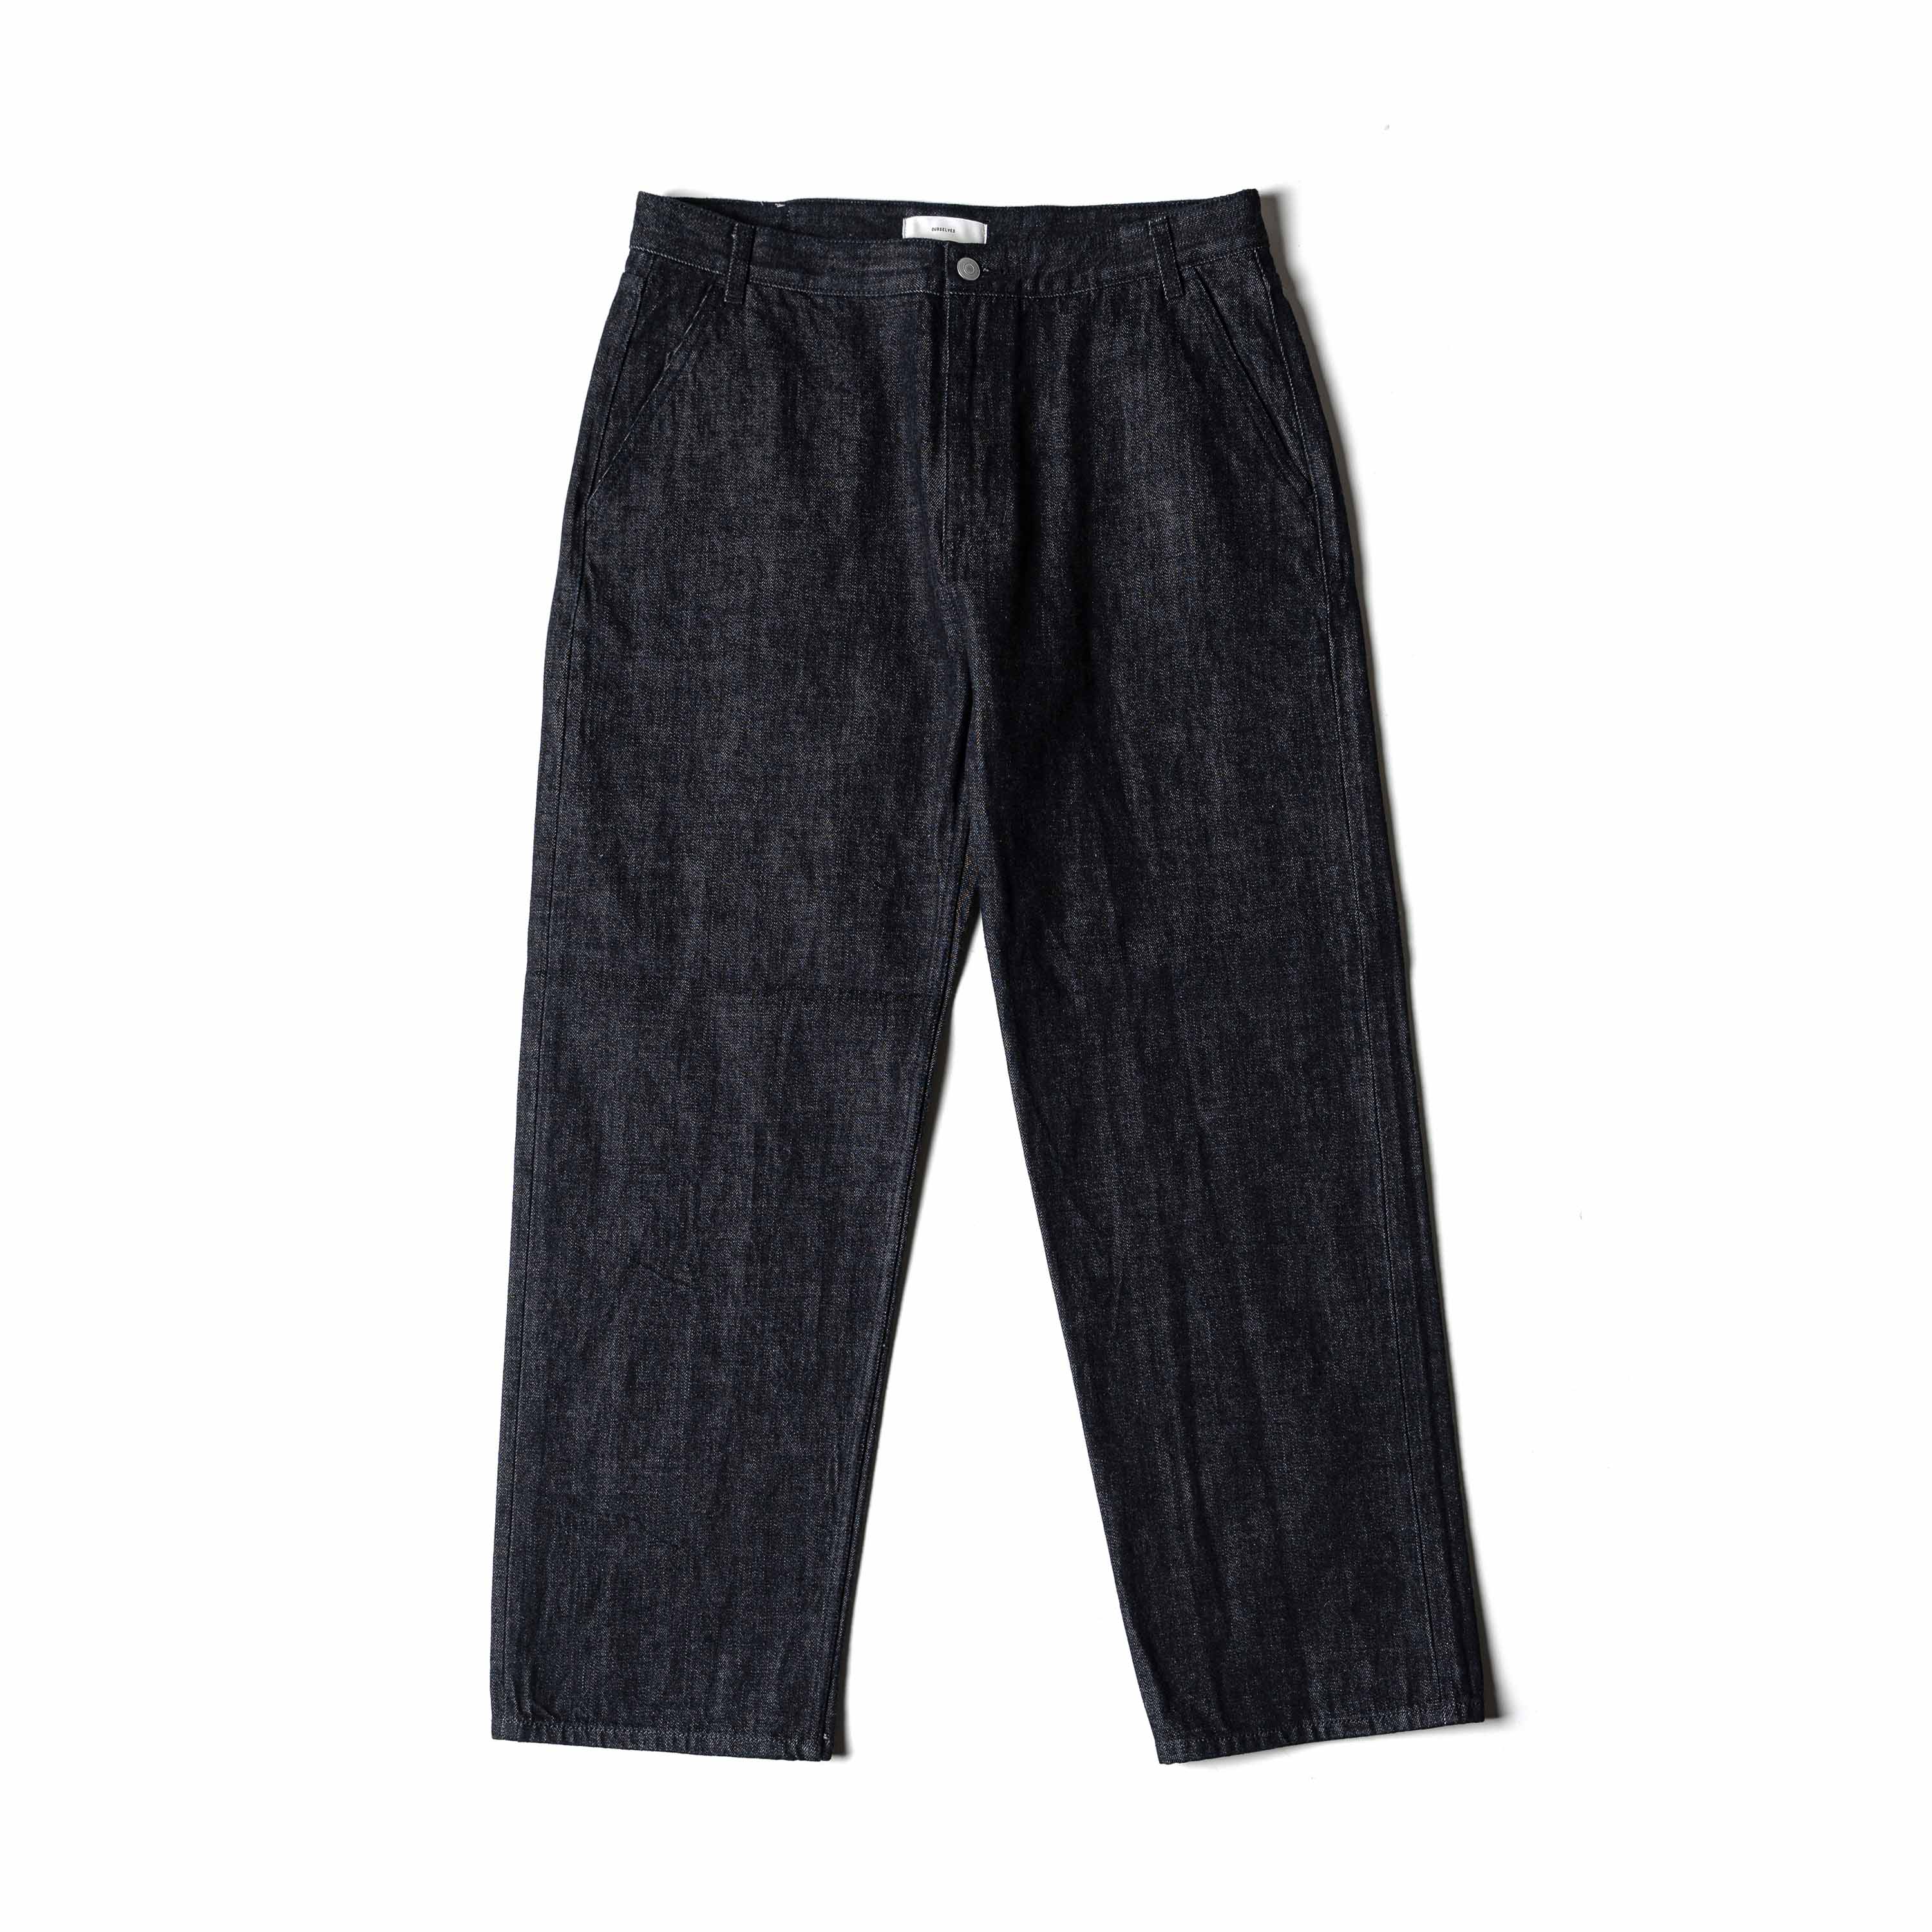 ORGANIC COTTON RELAXED DENIM PANTS - ONE WASH